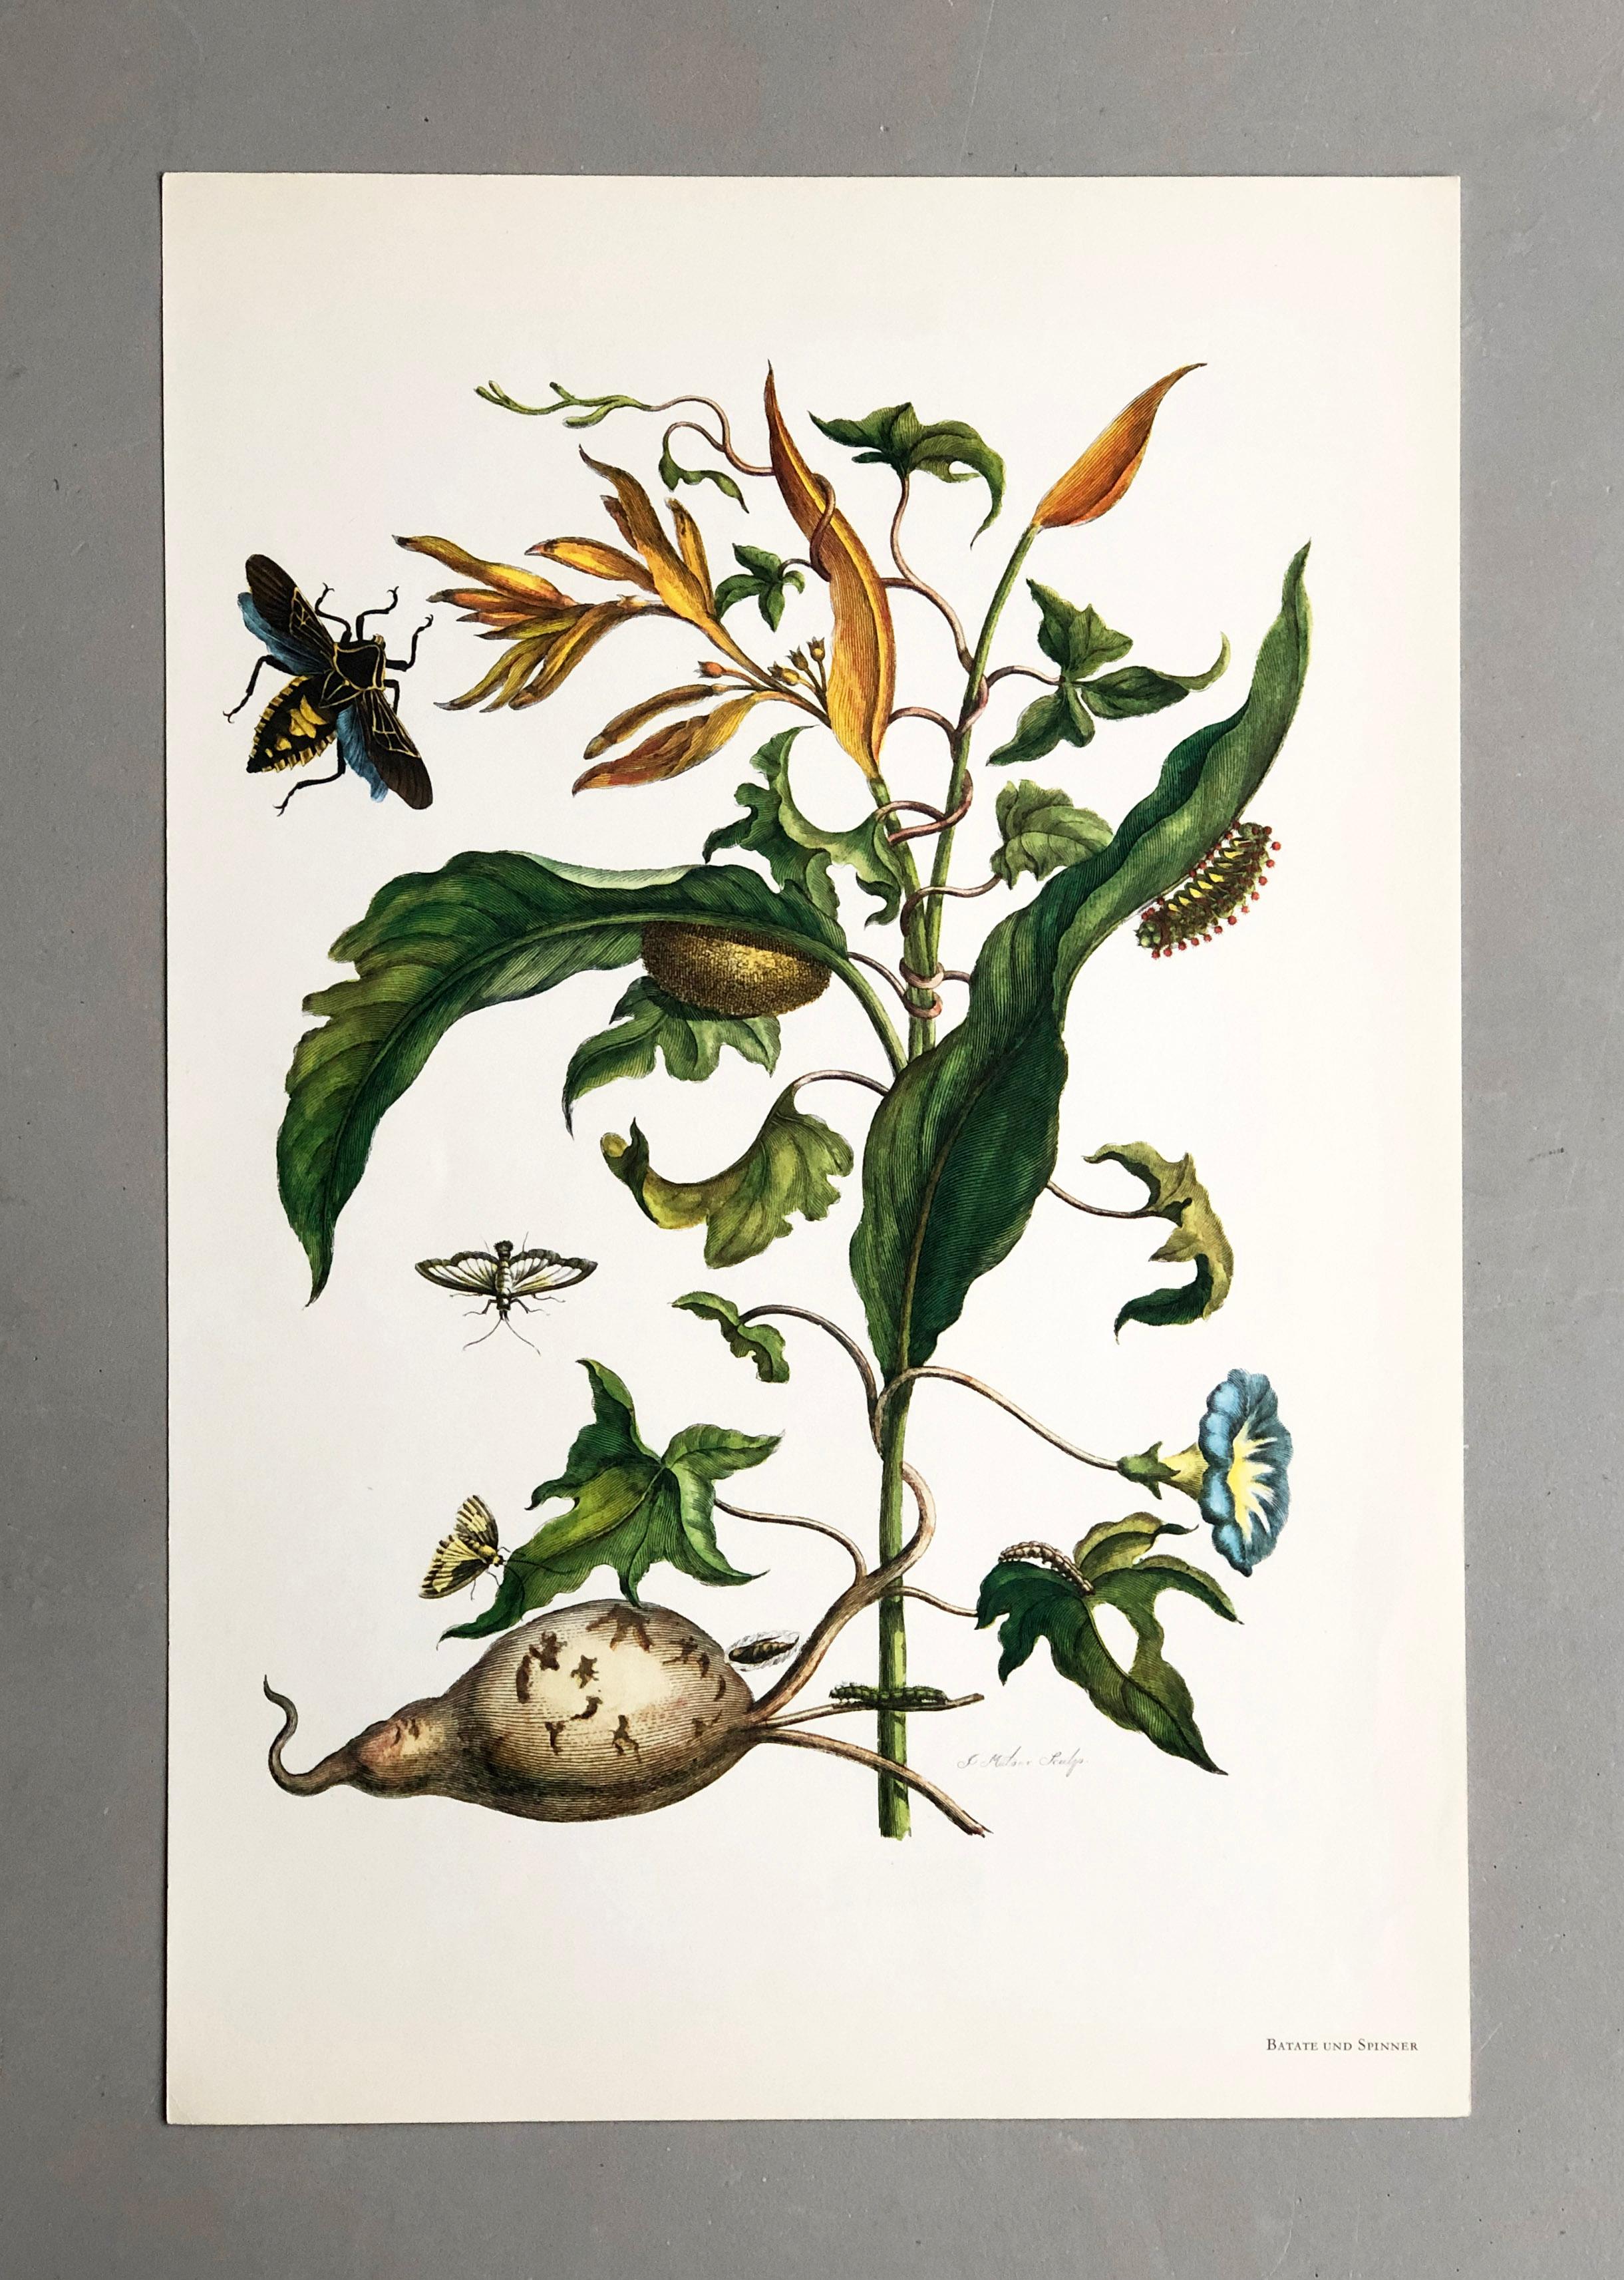 From Metamorphosis Insectorum Surinamensium, first published 1705
Engravings by J. Mulder, P. Sluyter (Sluiter) and D. Stoopendaal after Maria Sybilla Merian.

This plate is part of a comprehensive collection comprising 17 plates. Check out other